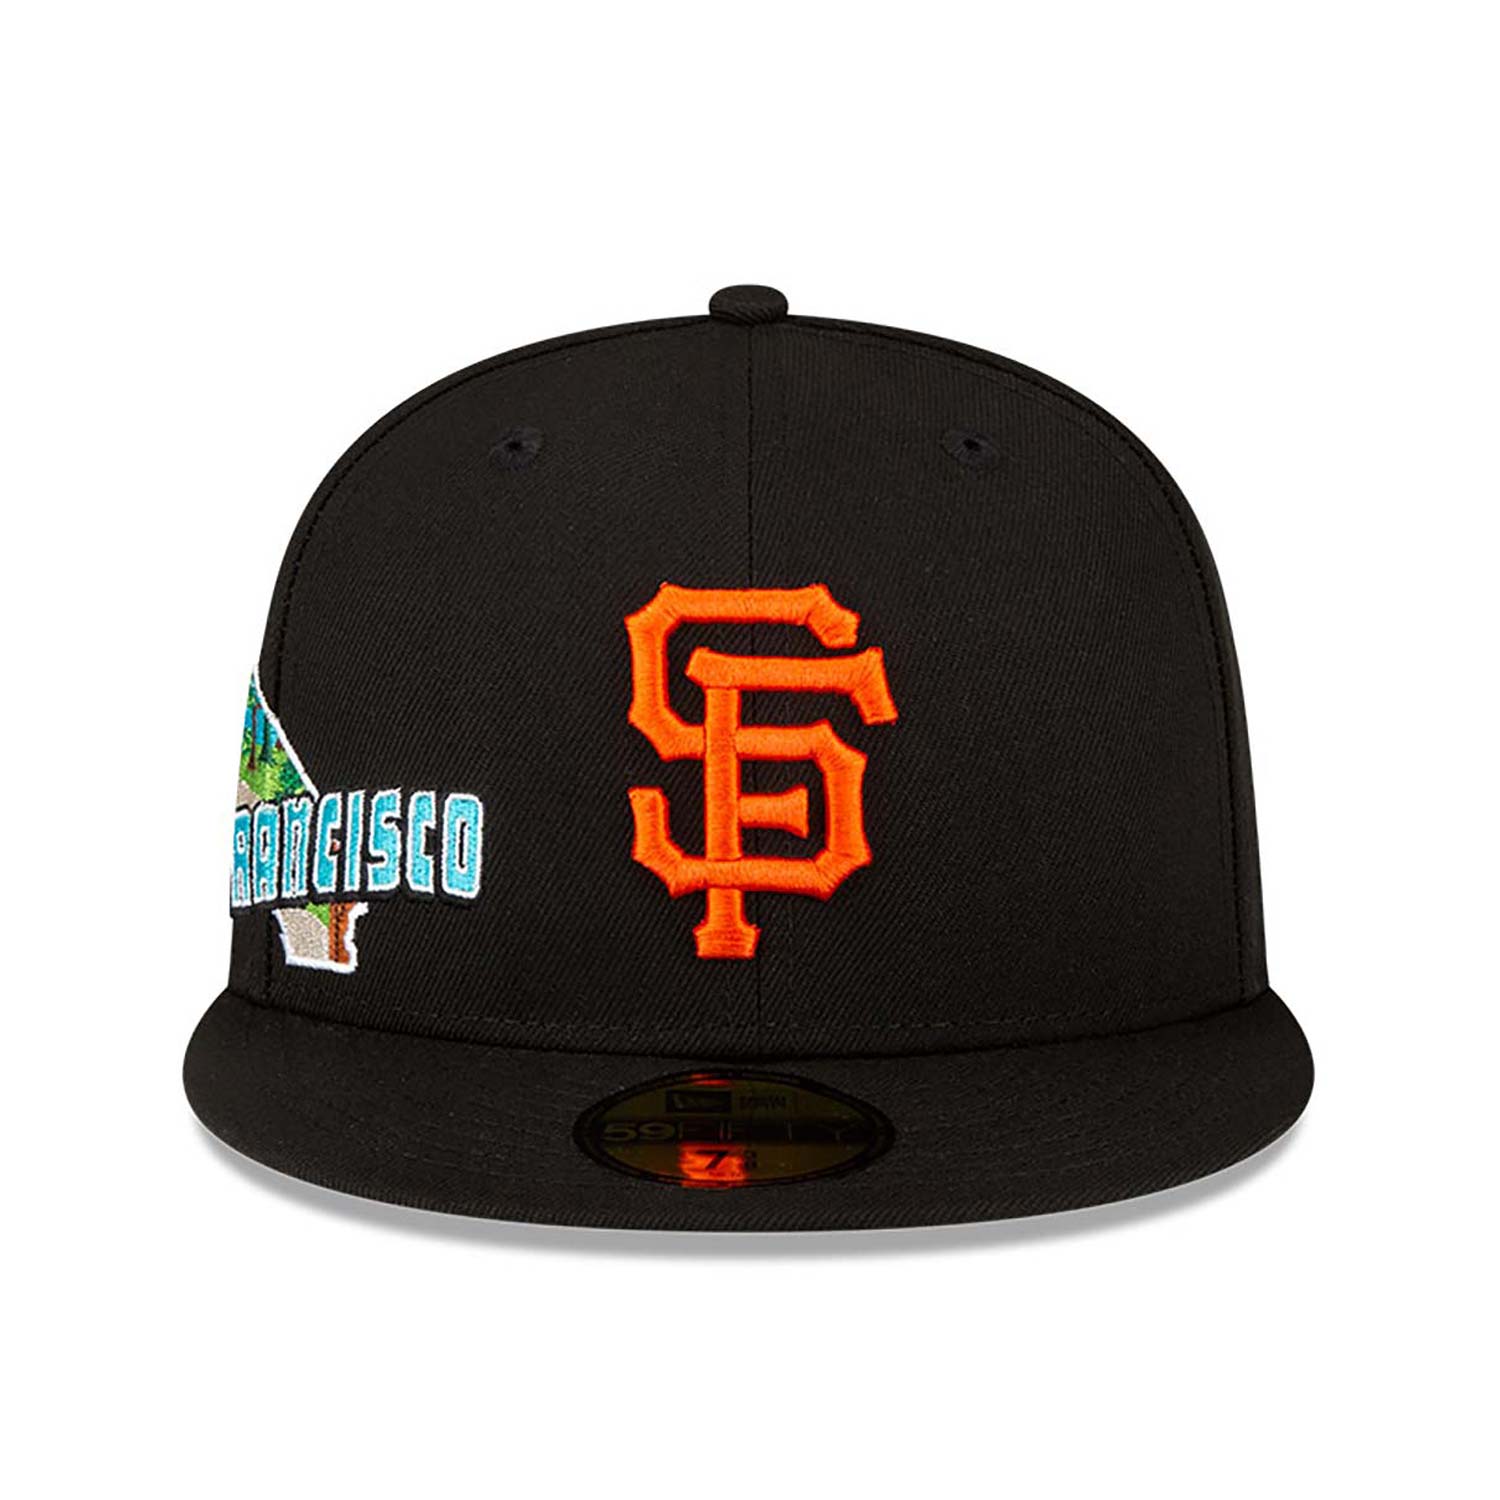 San Francisco Giants Stateview Black 59FIFTY Fitted Cap